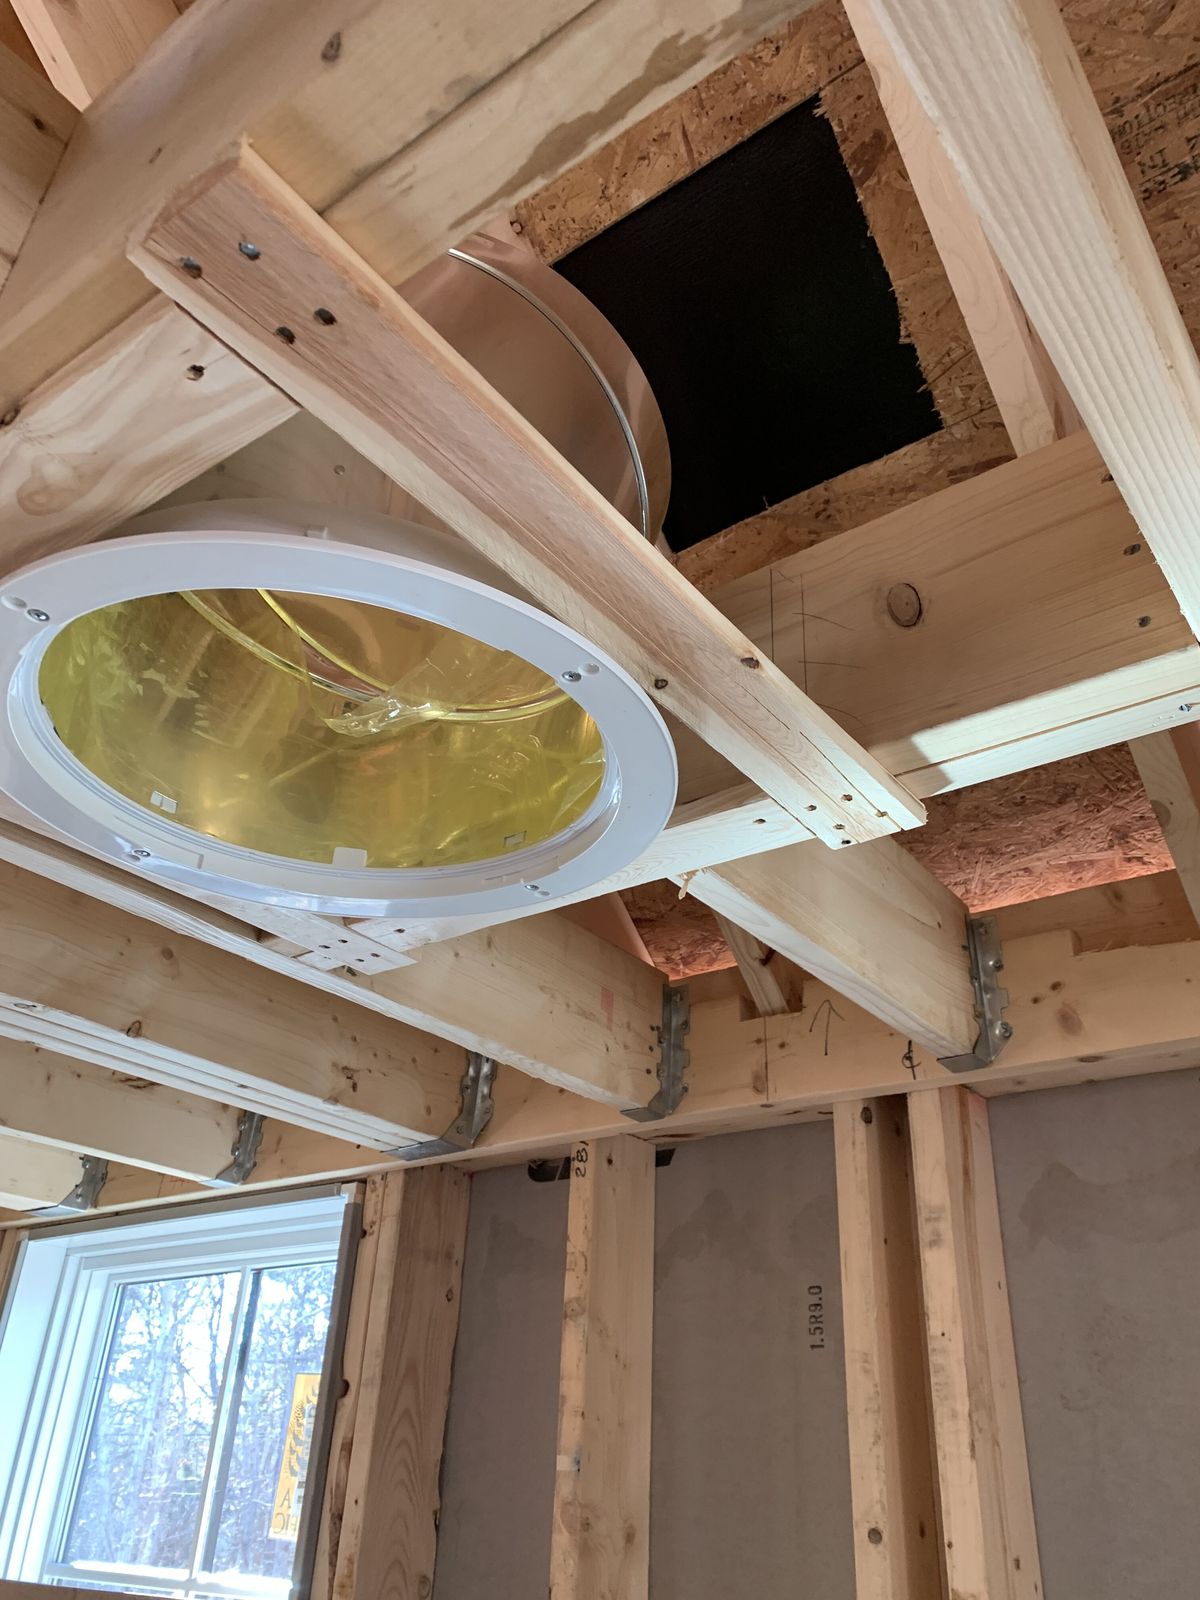 Shot of sun tunnel in ceiling of TOH 2020 Idea House on the Cape